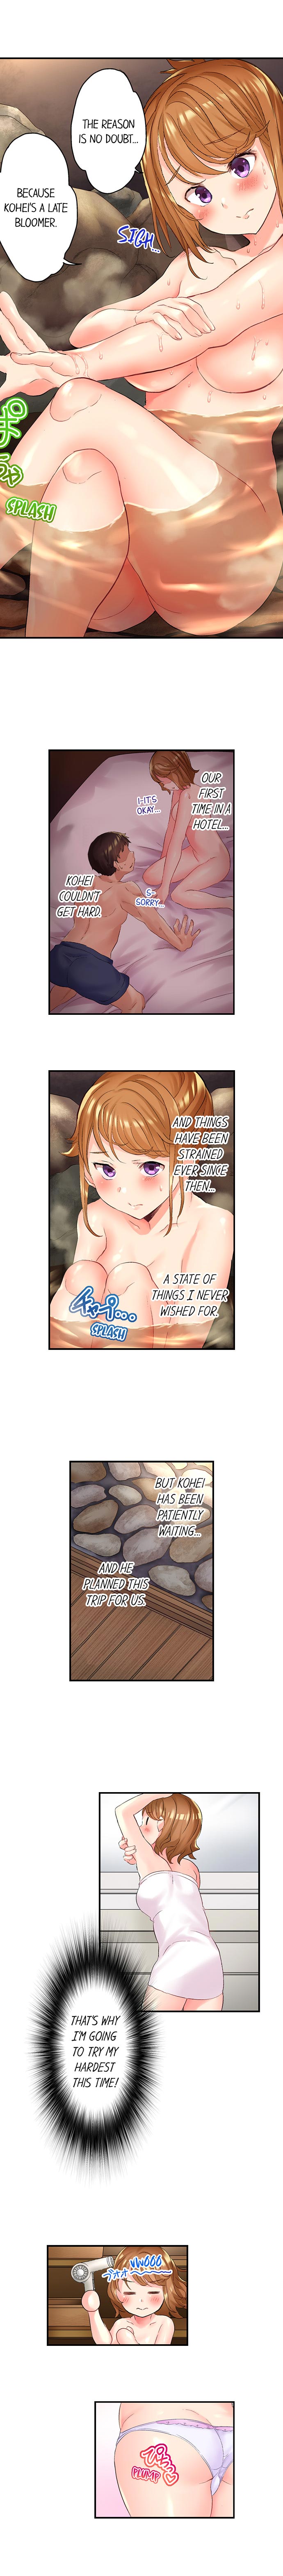 NTR Massage - Chapter 1 Page 6